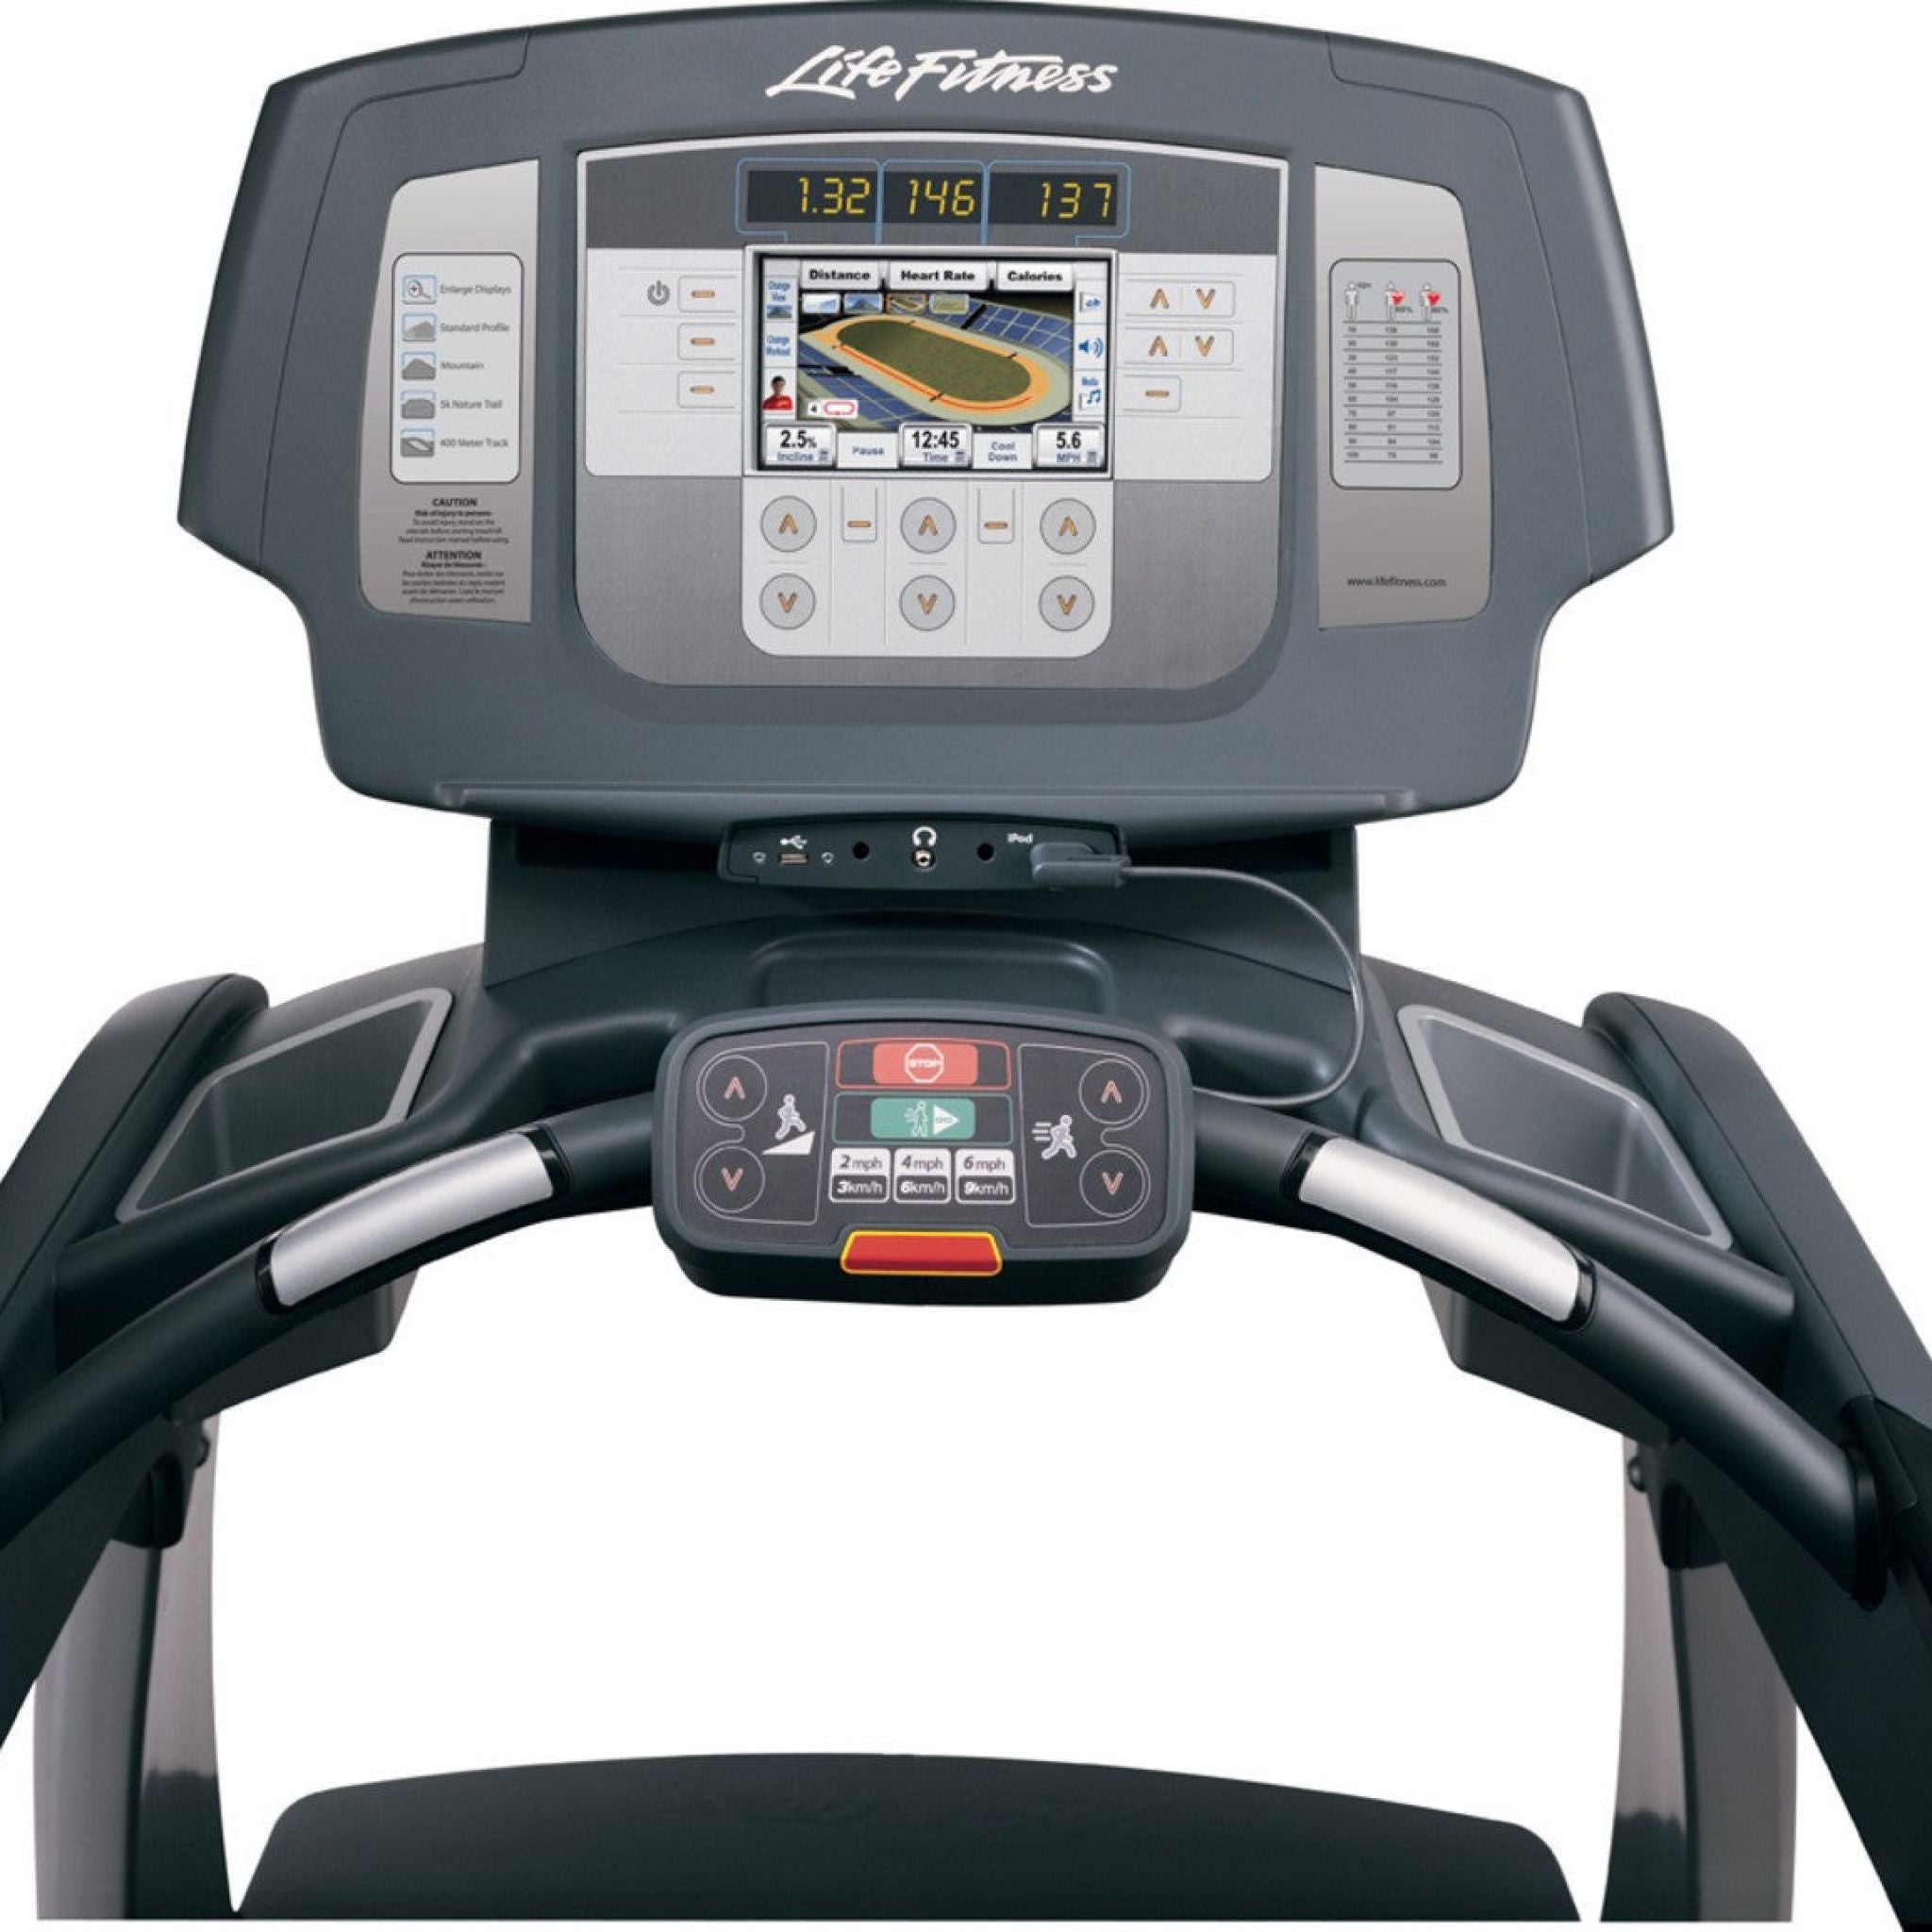 Multi-featured Console on the Life Fitness 95T Inspire Treadmill